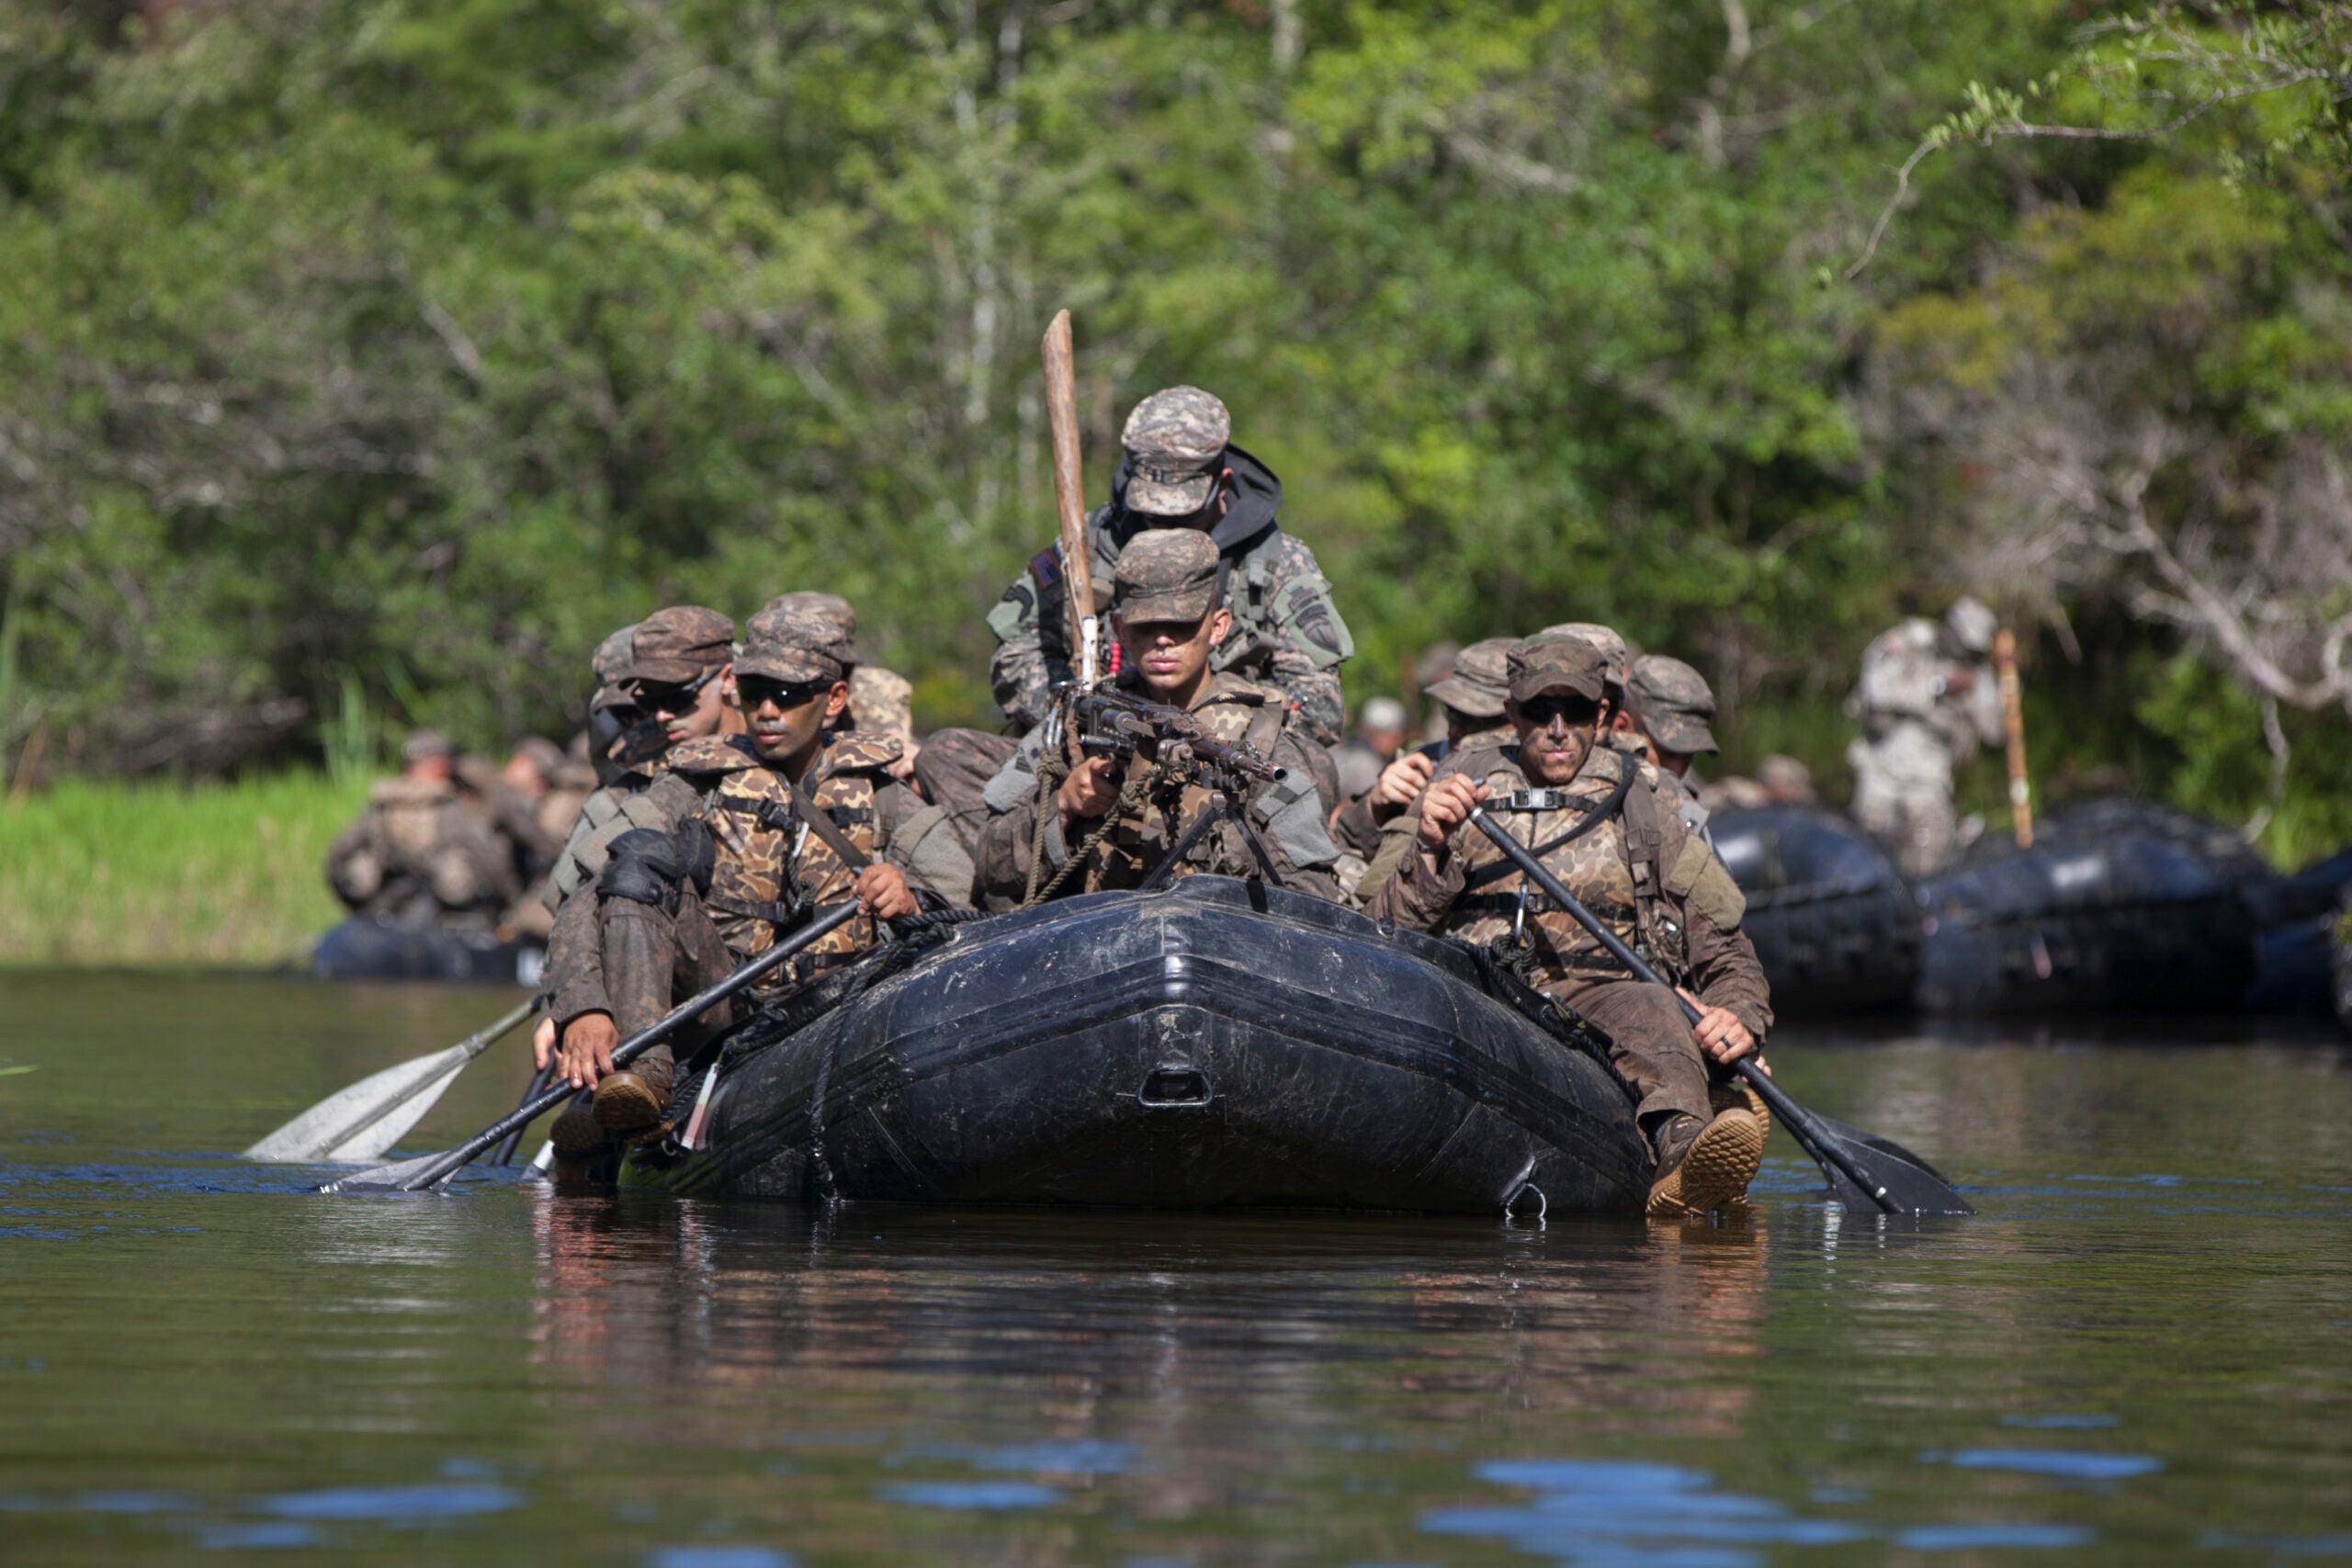 A group U.S. Army Ranger students, assigned to the Airborne and Ranger Training Brigade, paddles their zodiac boat down the river to start their their waterborne mission on Camp Rudder, Eglin Air Force Base, Fl., July 7, 2016. The Florida Phase of Ranger School is the third and final phase that these Ranger students must complete to earn the coveted Ranger Tab. (U.S. Army photo by Sgt. Austin Berner/Released)